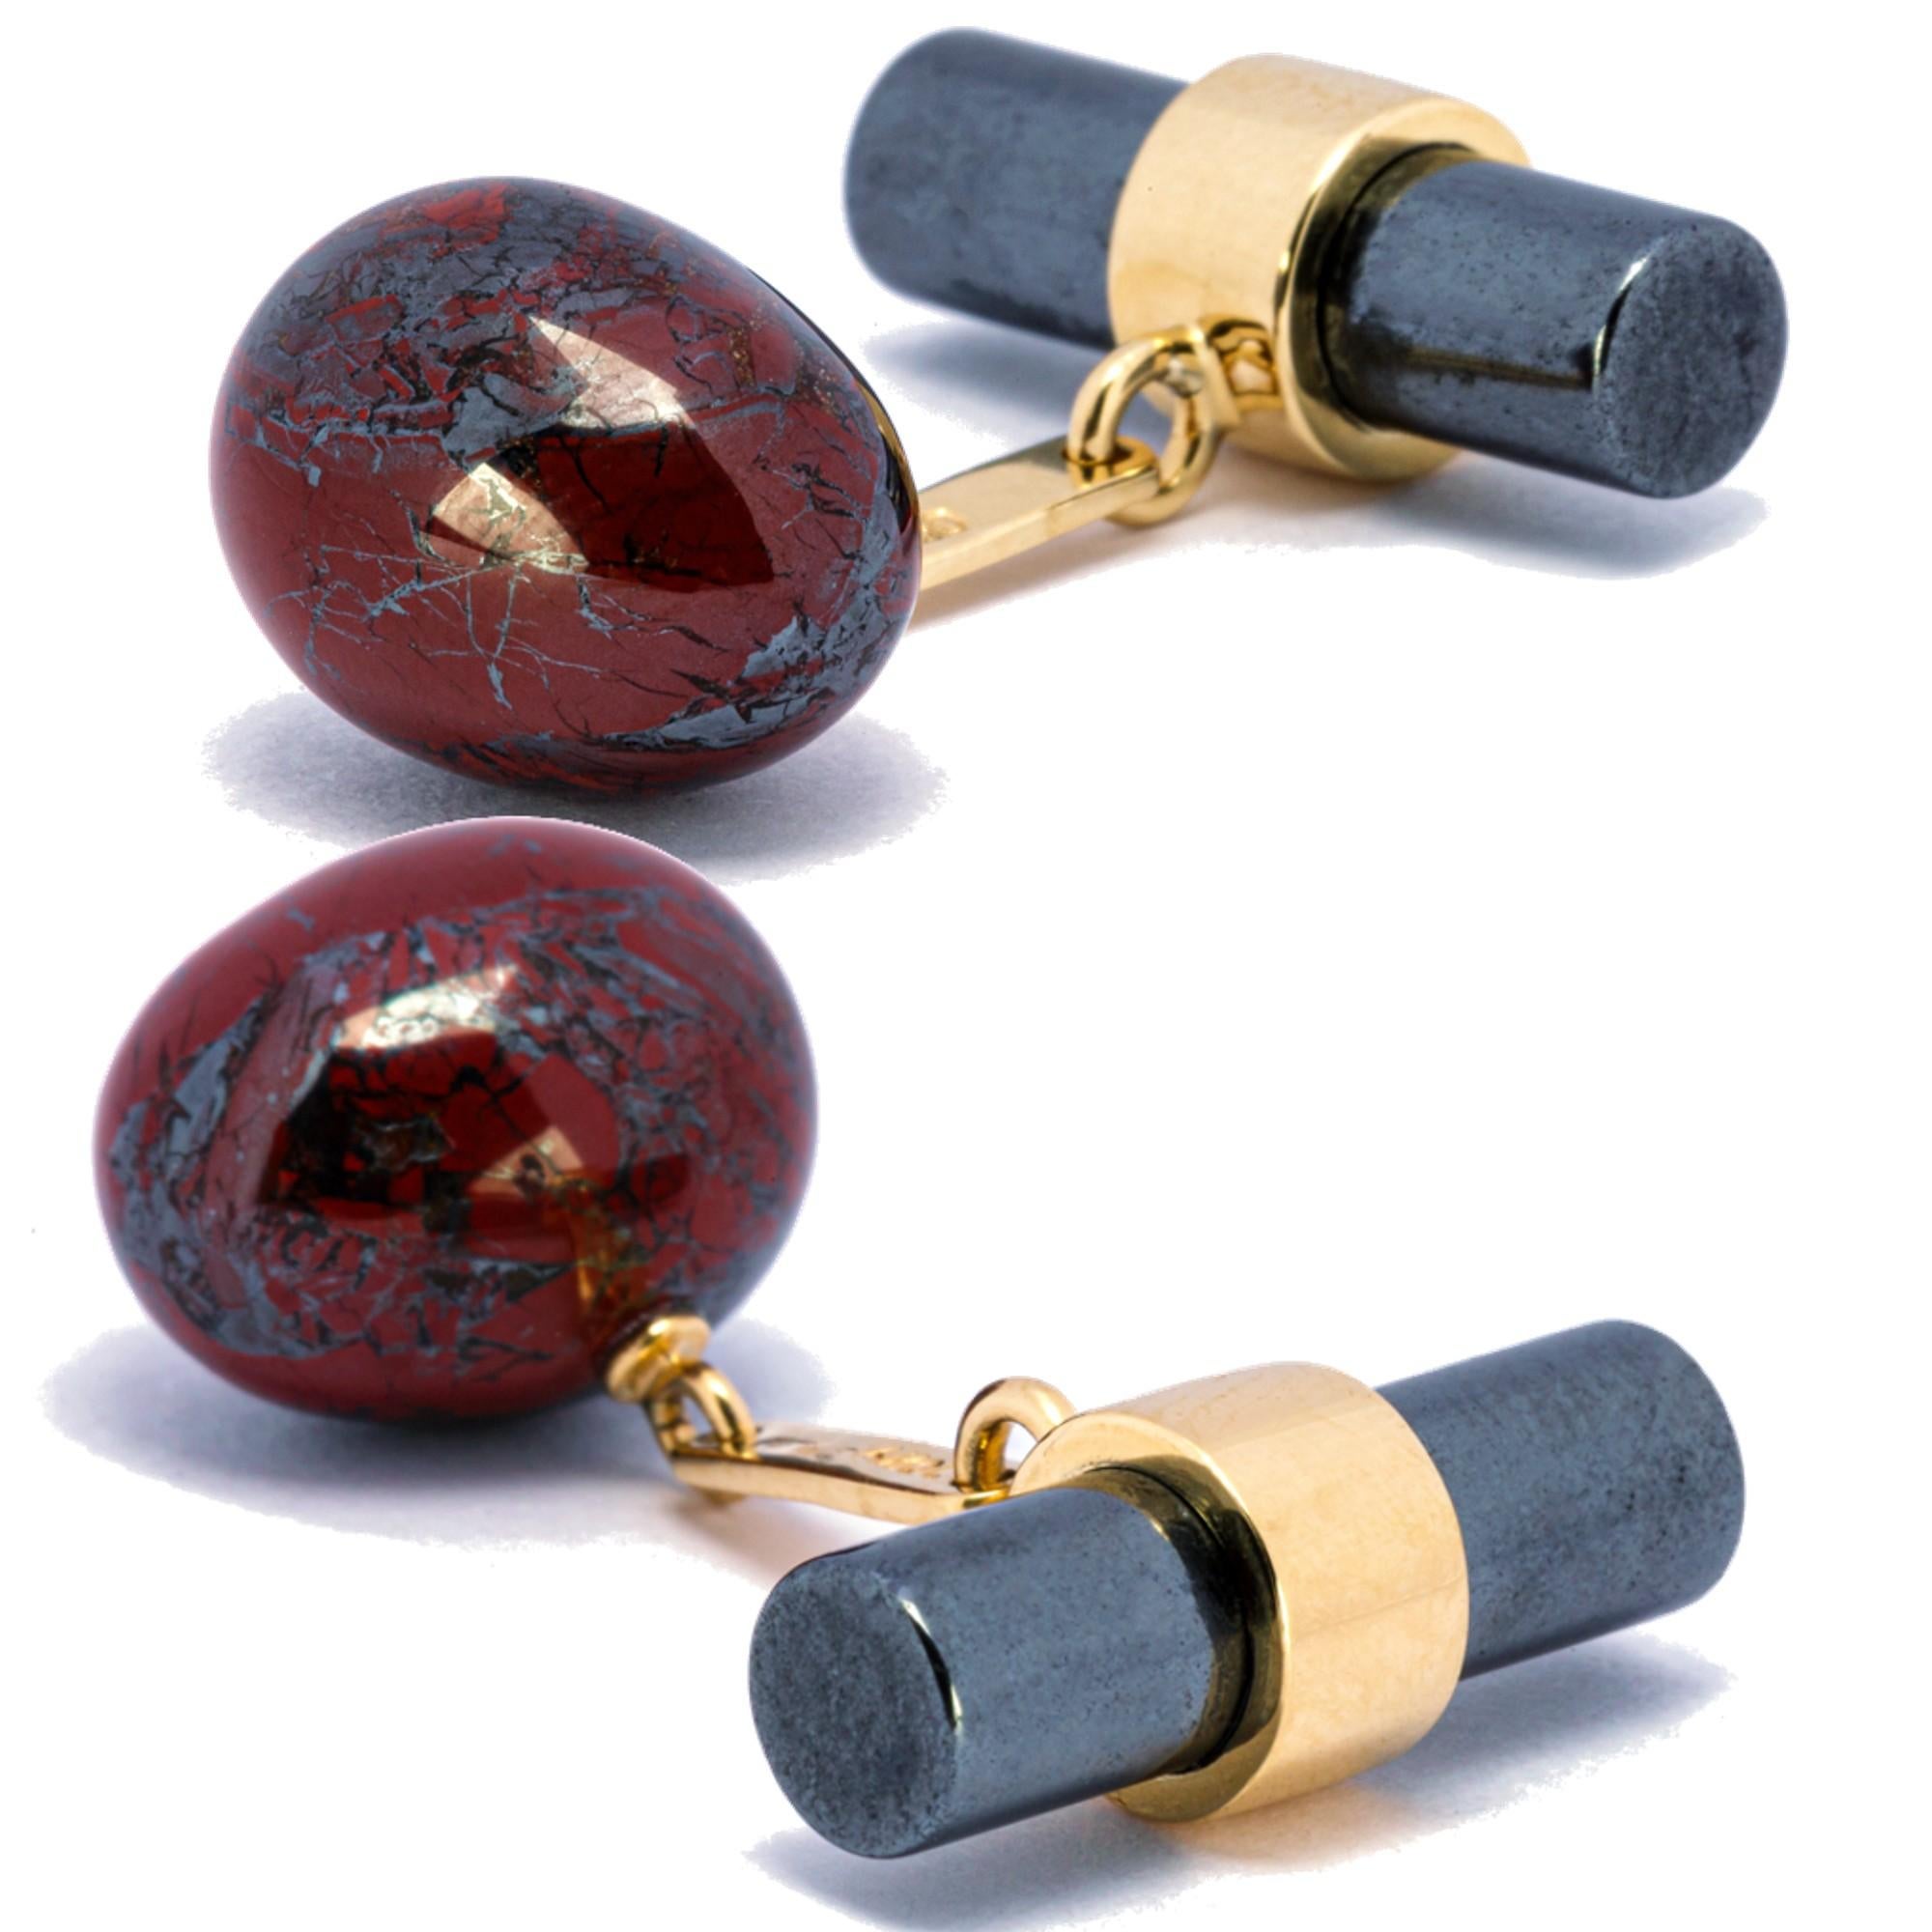 Alex Jona design collection, hand crafted in Italy, 18 karat Yellow gold Breciated Jasper Egg and Hematite Cylinder cufflinks.
Dimensions : 
- Cylinder: 0.75 in. L x 0.2 in. D - 20 mm. L x 5 mm. D
- Egg: 0.53 in L x 0.42 in W -  13.51 mm L x 10 mm